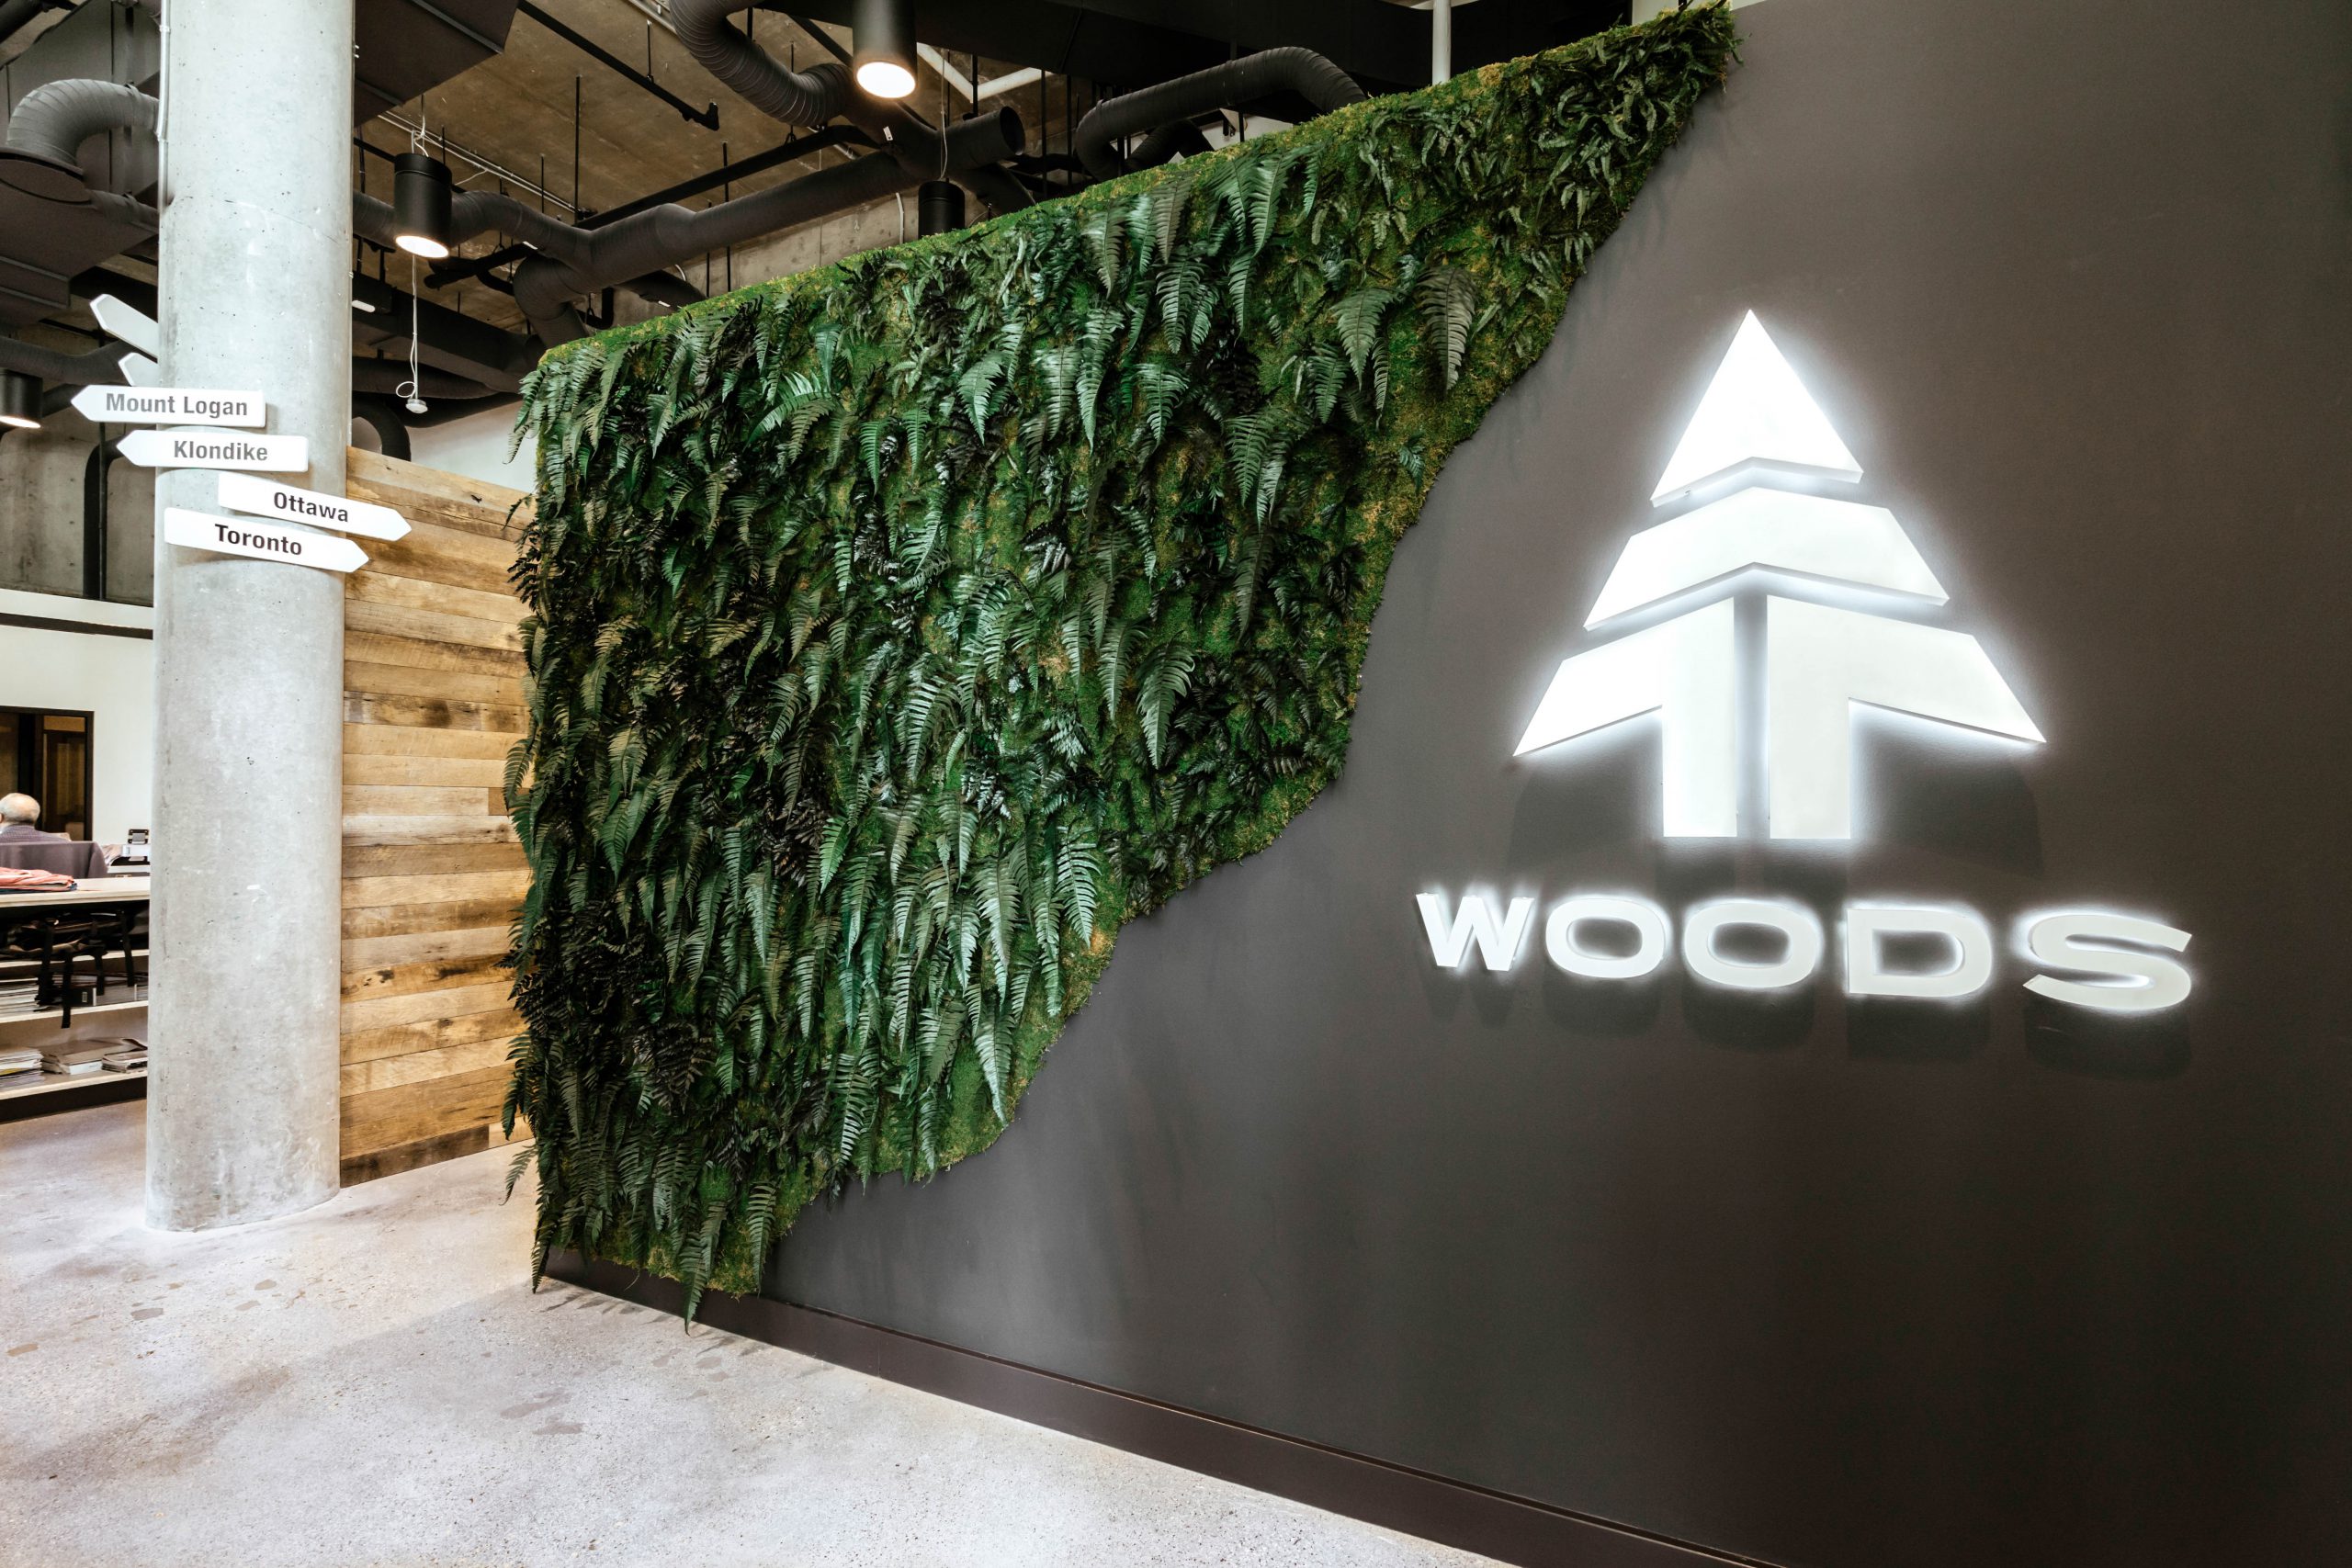 Woods Product Development Lab in Vancouver BC Showroom Design Branded Wall by Cutler